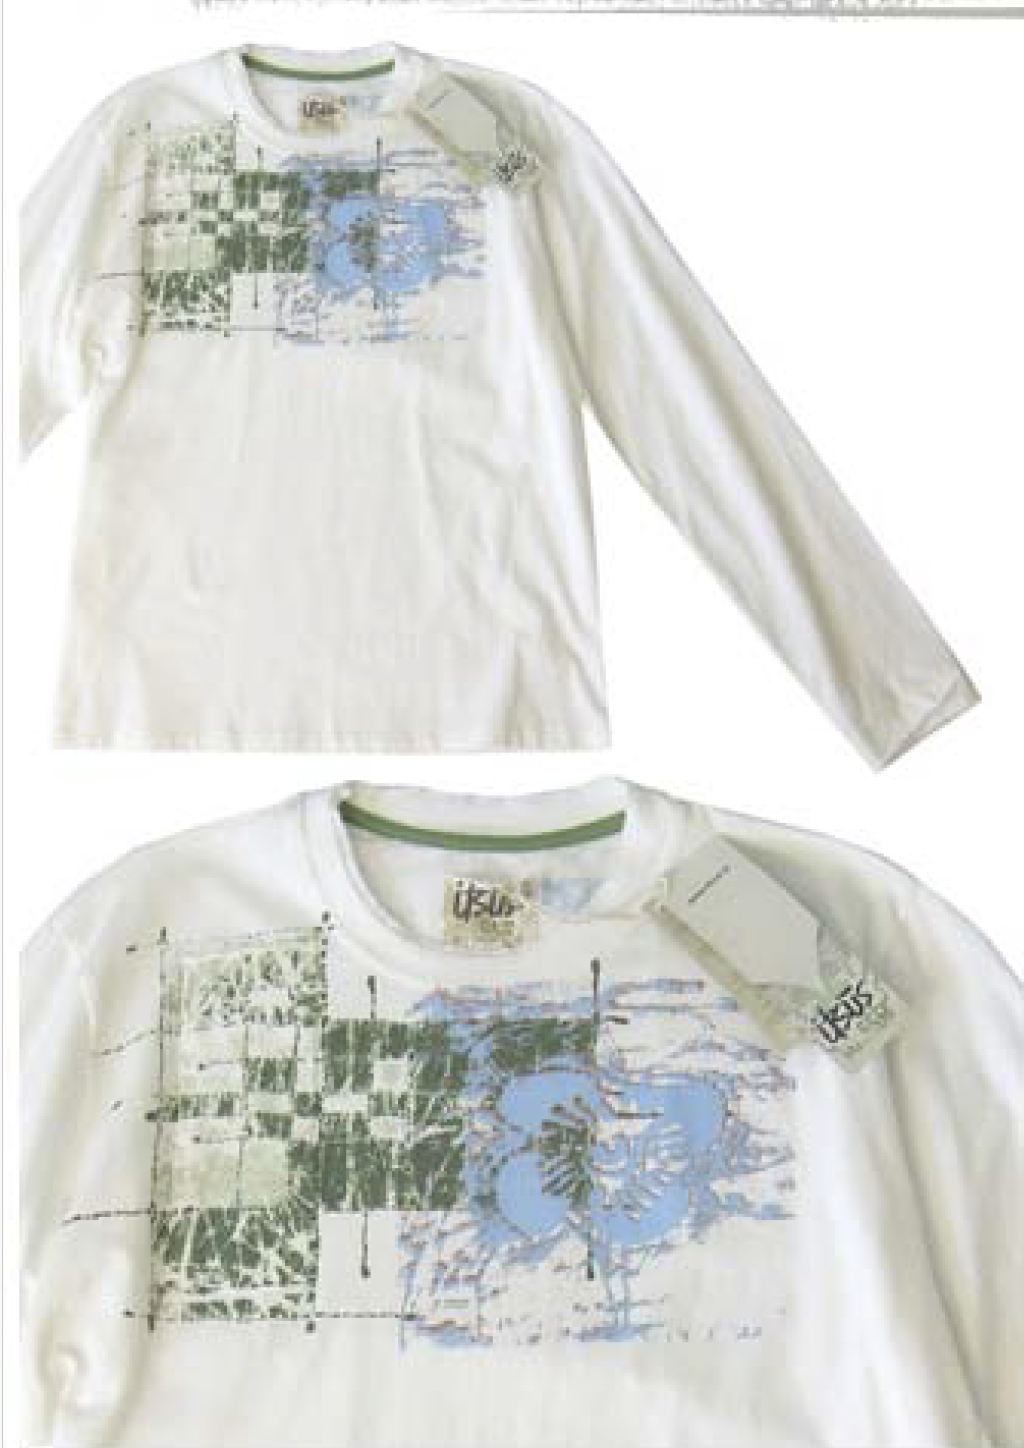 Itsus Vintage Men's Long-Sleeve "BATIK" in Cream (2009 Collection) - Email Us to Order